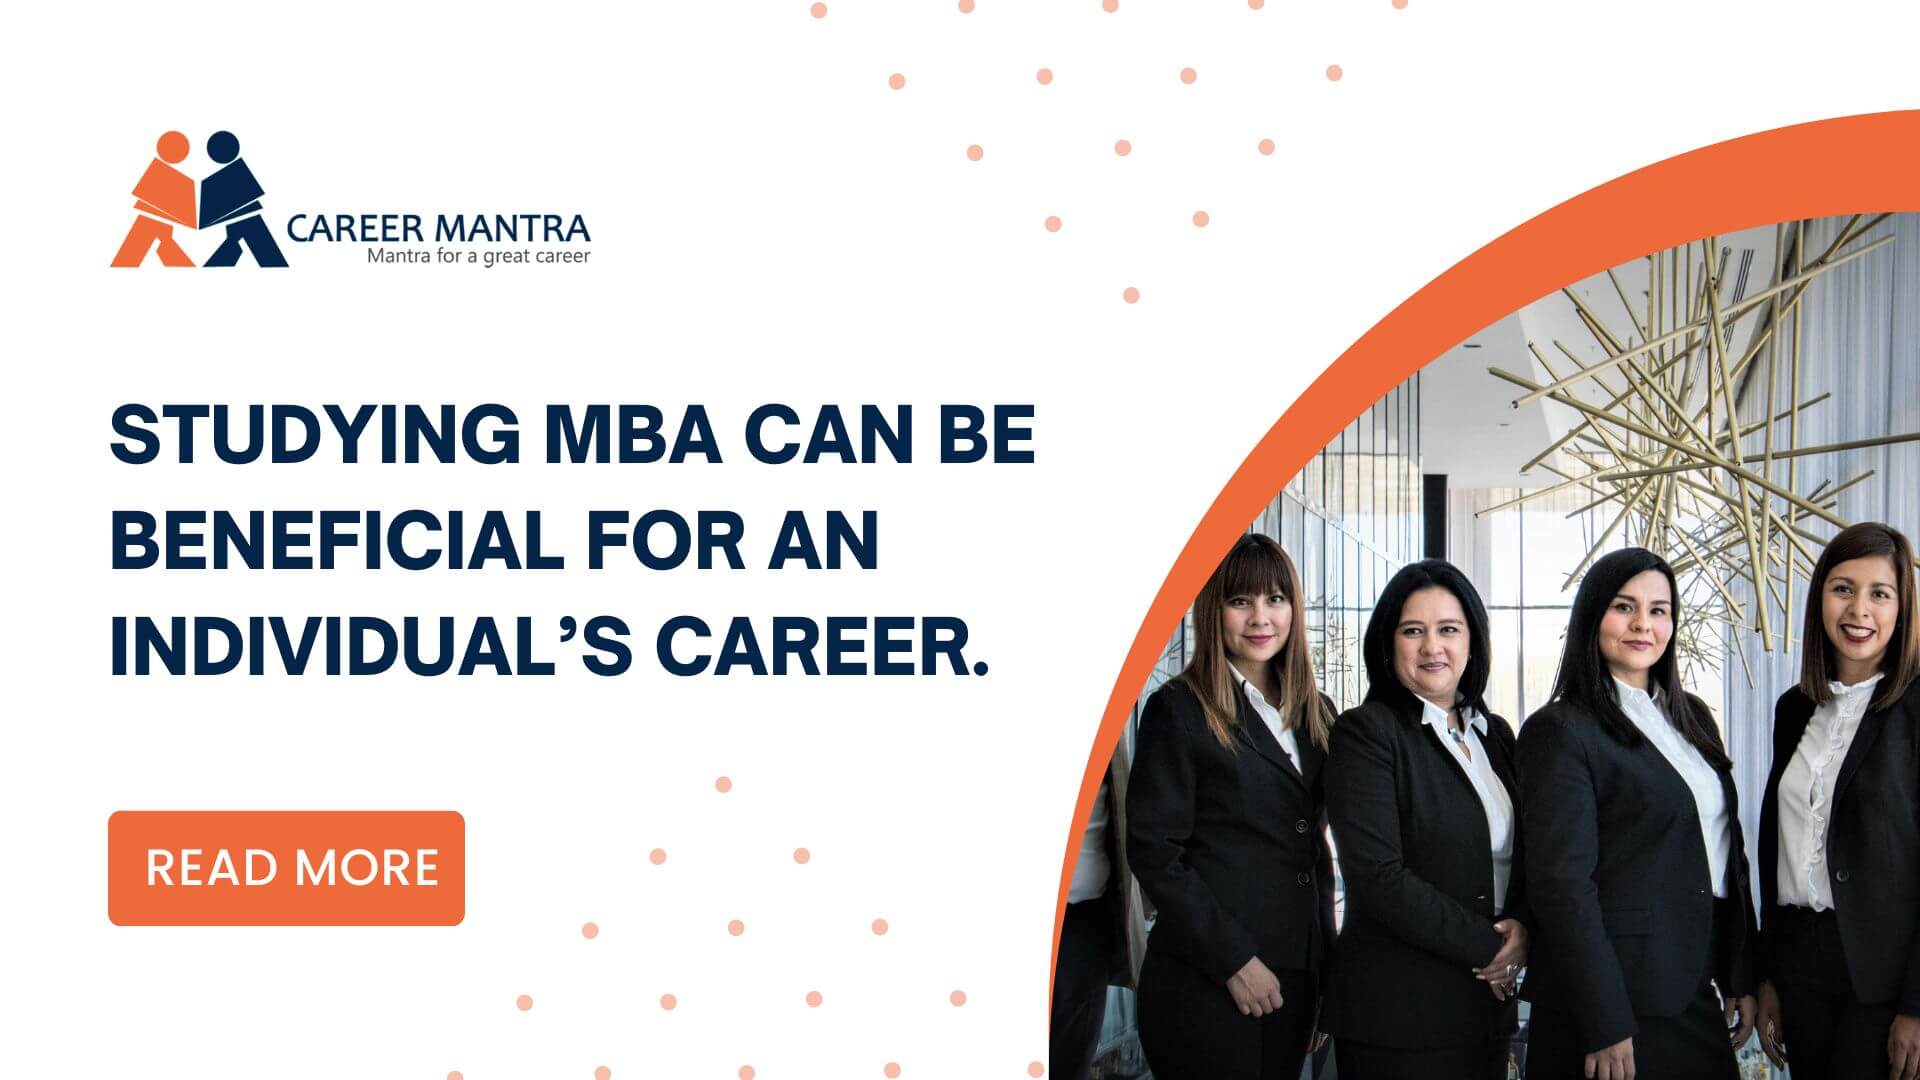 https://www.careermantra.net/blog/studying-mba-can-be-beneficial-for-an-individuals-career/